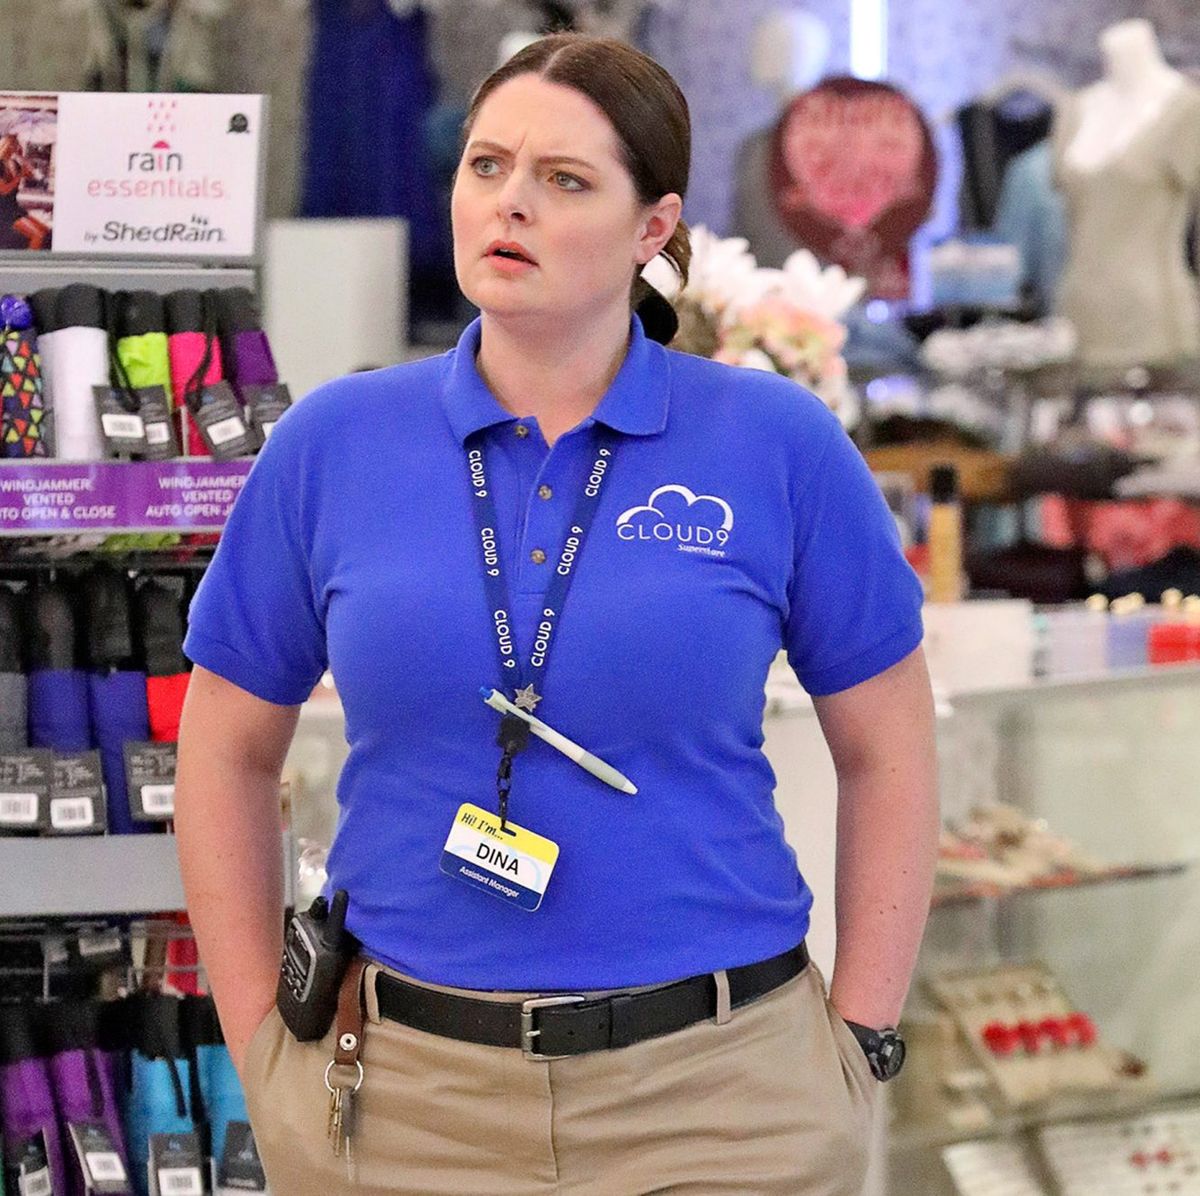 Superstore star confirms next project following series finale